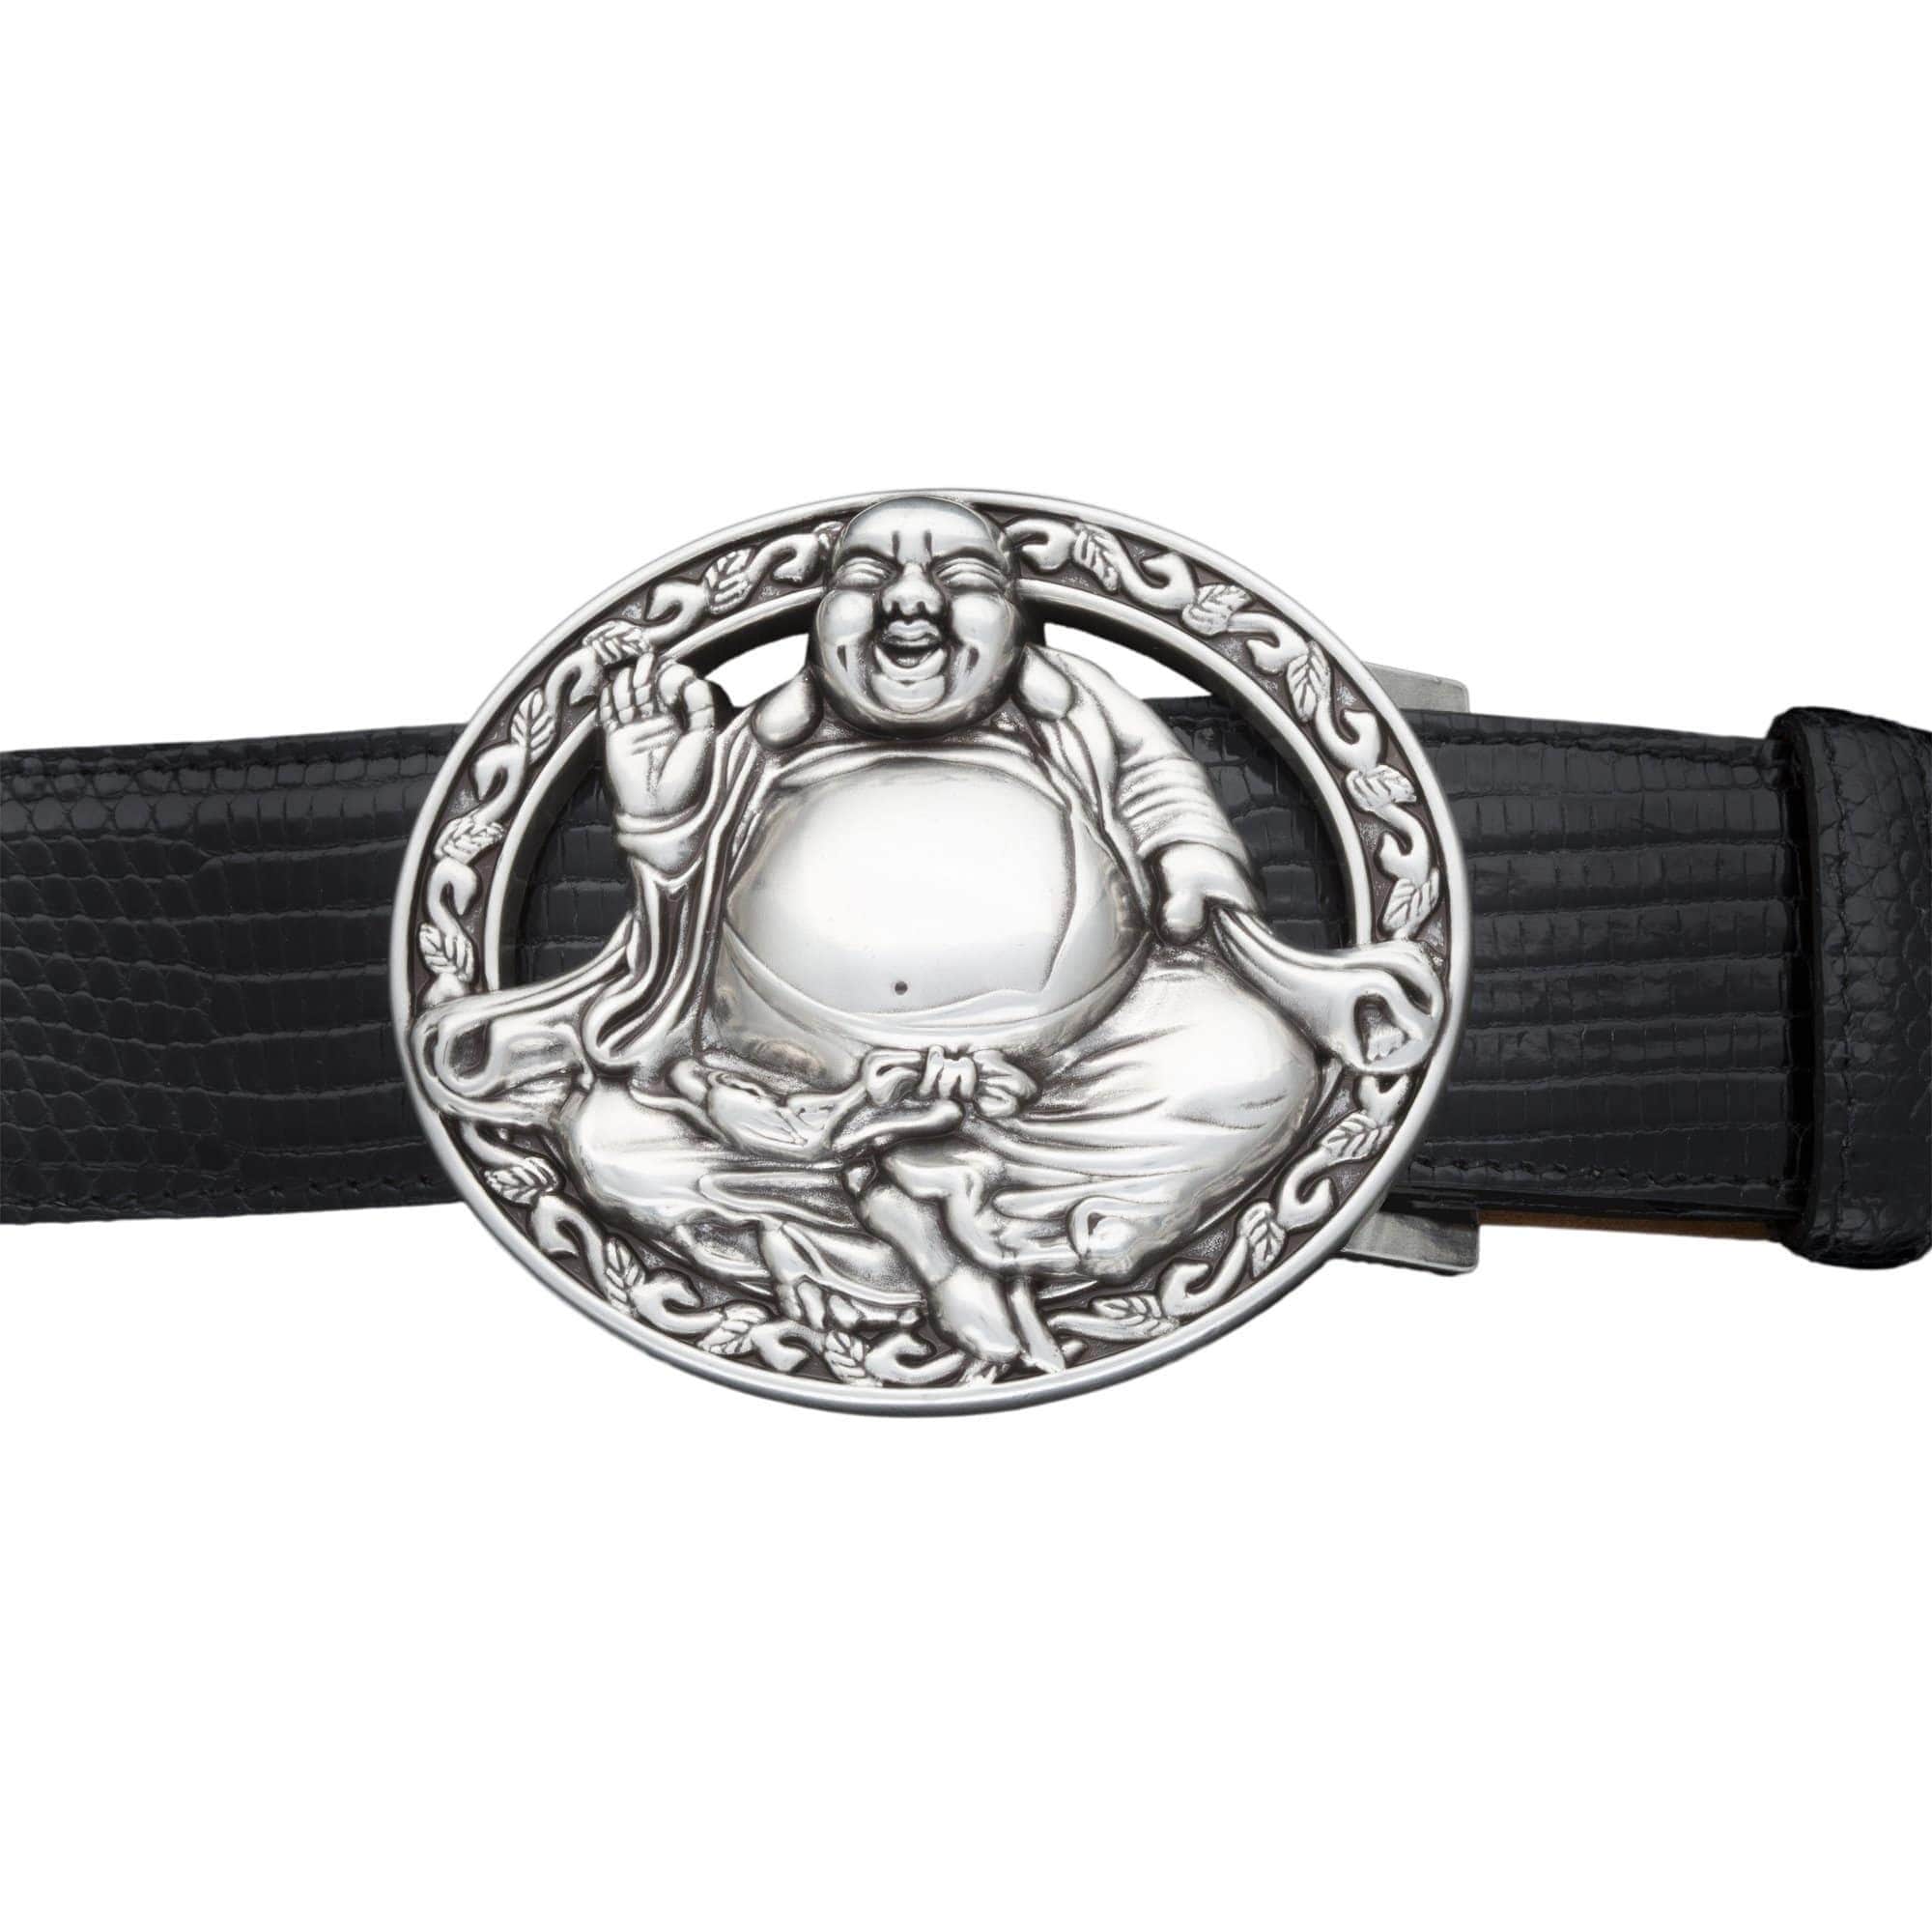 Kalifano Buckles KB40-2189AS - Kalifano Buckle 40mm Buddha Bless- Antique Silver KB40-2189AS